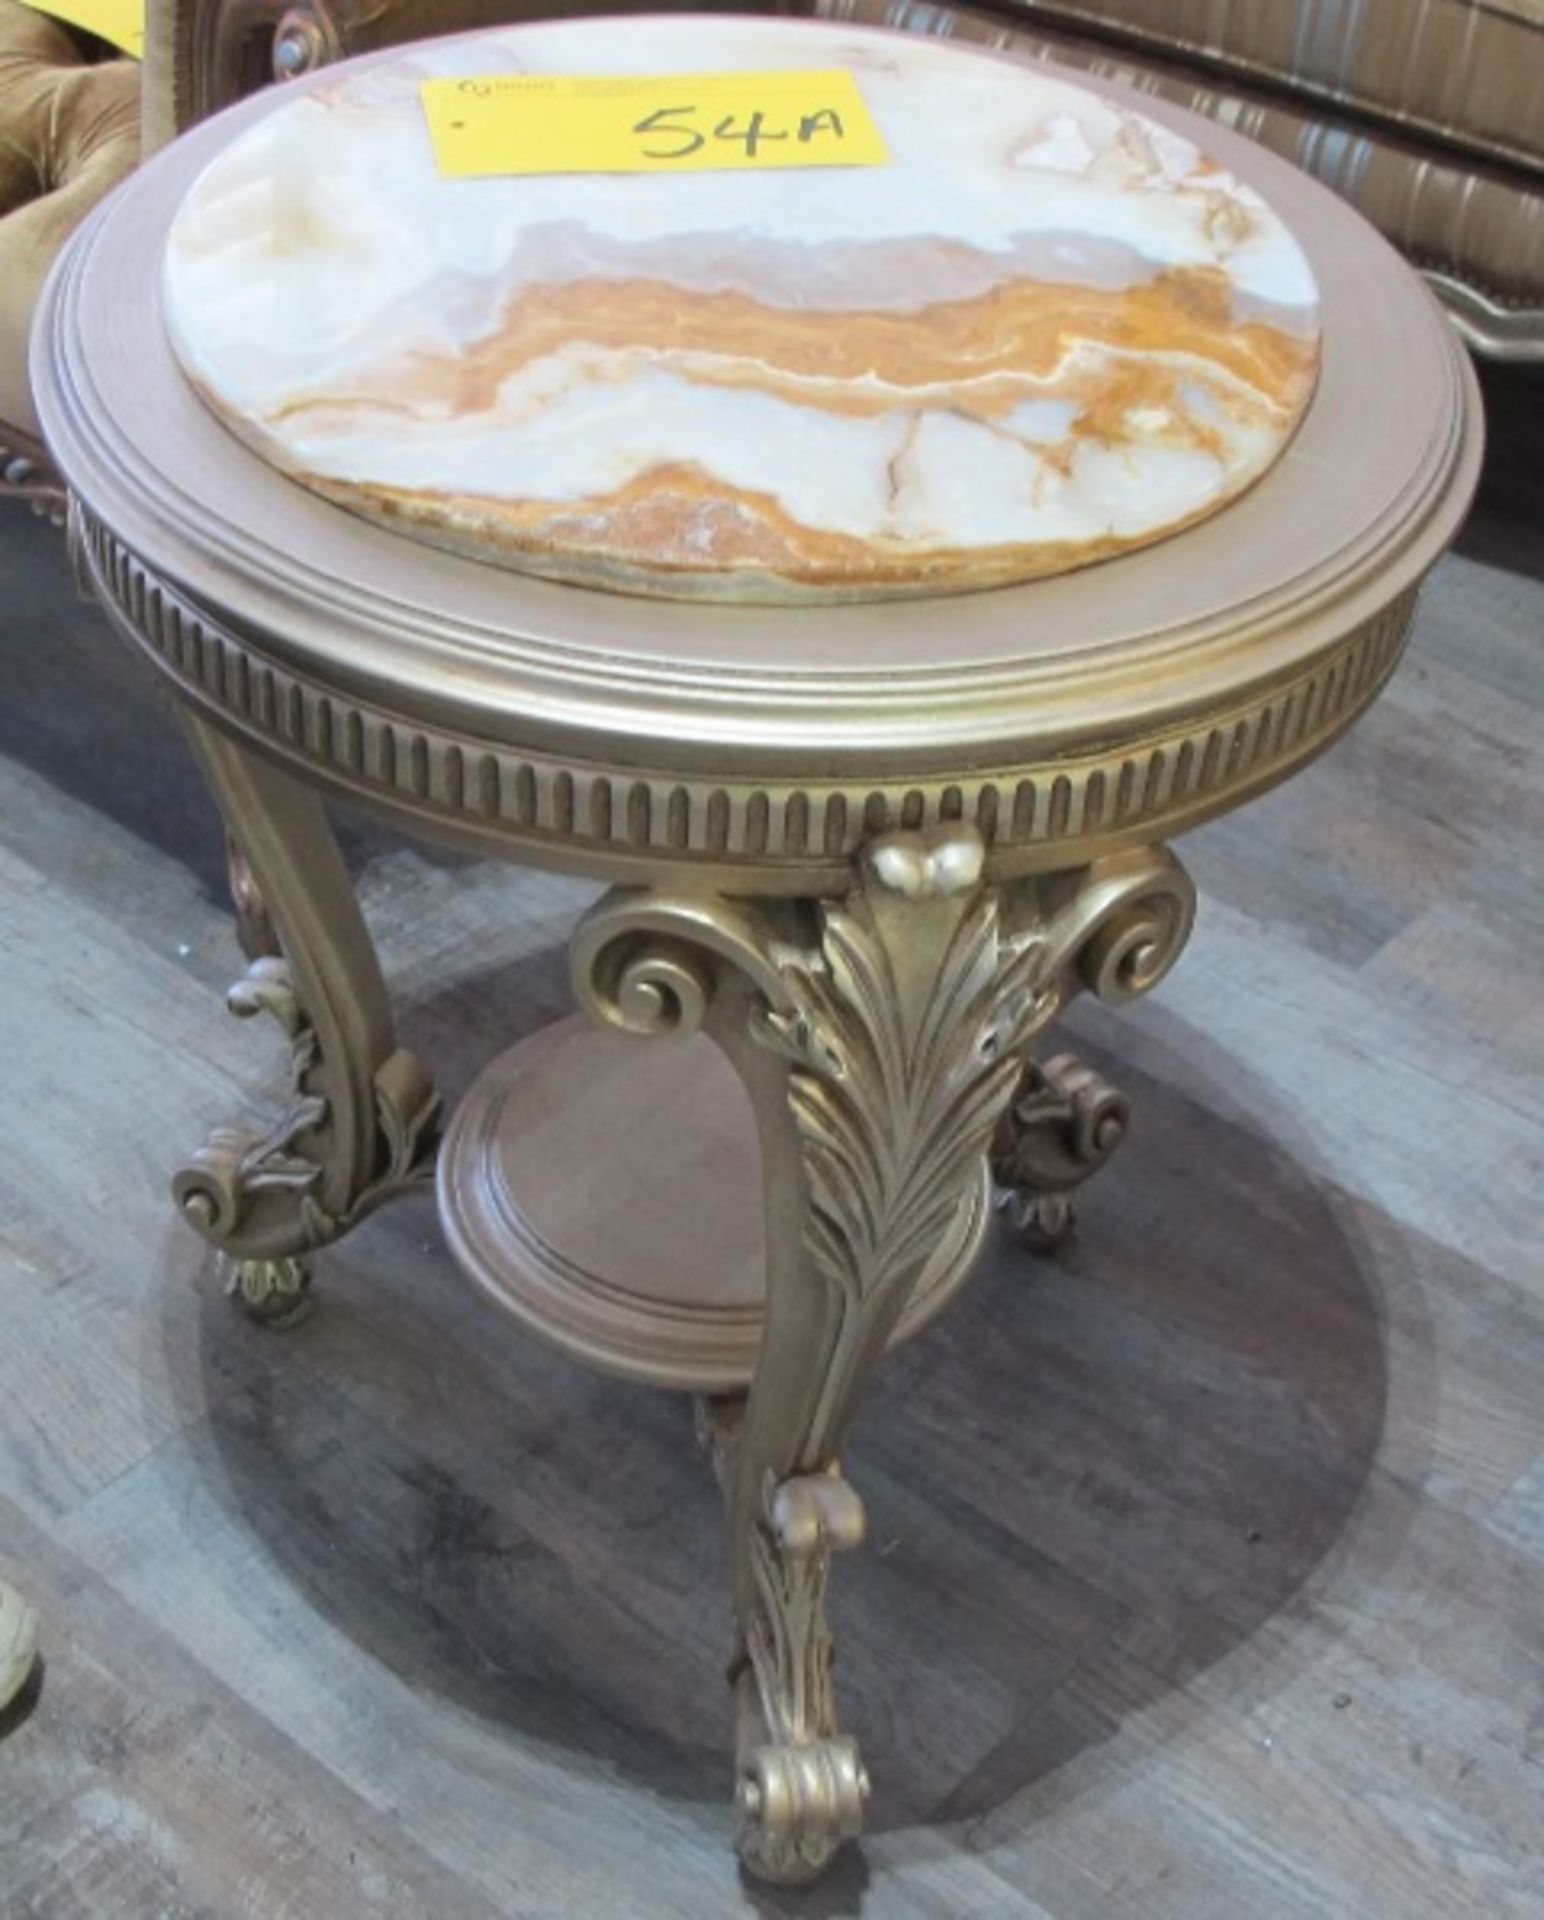 CORDOBA ACCENT TABLE, 21"DIA X 25.5"H, MSRP $1,900